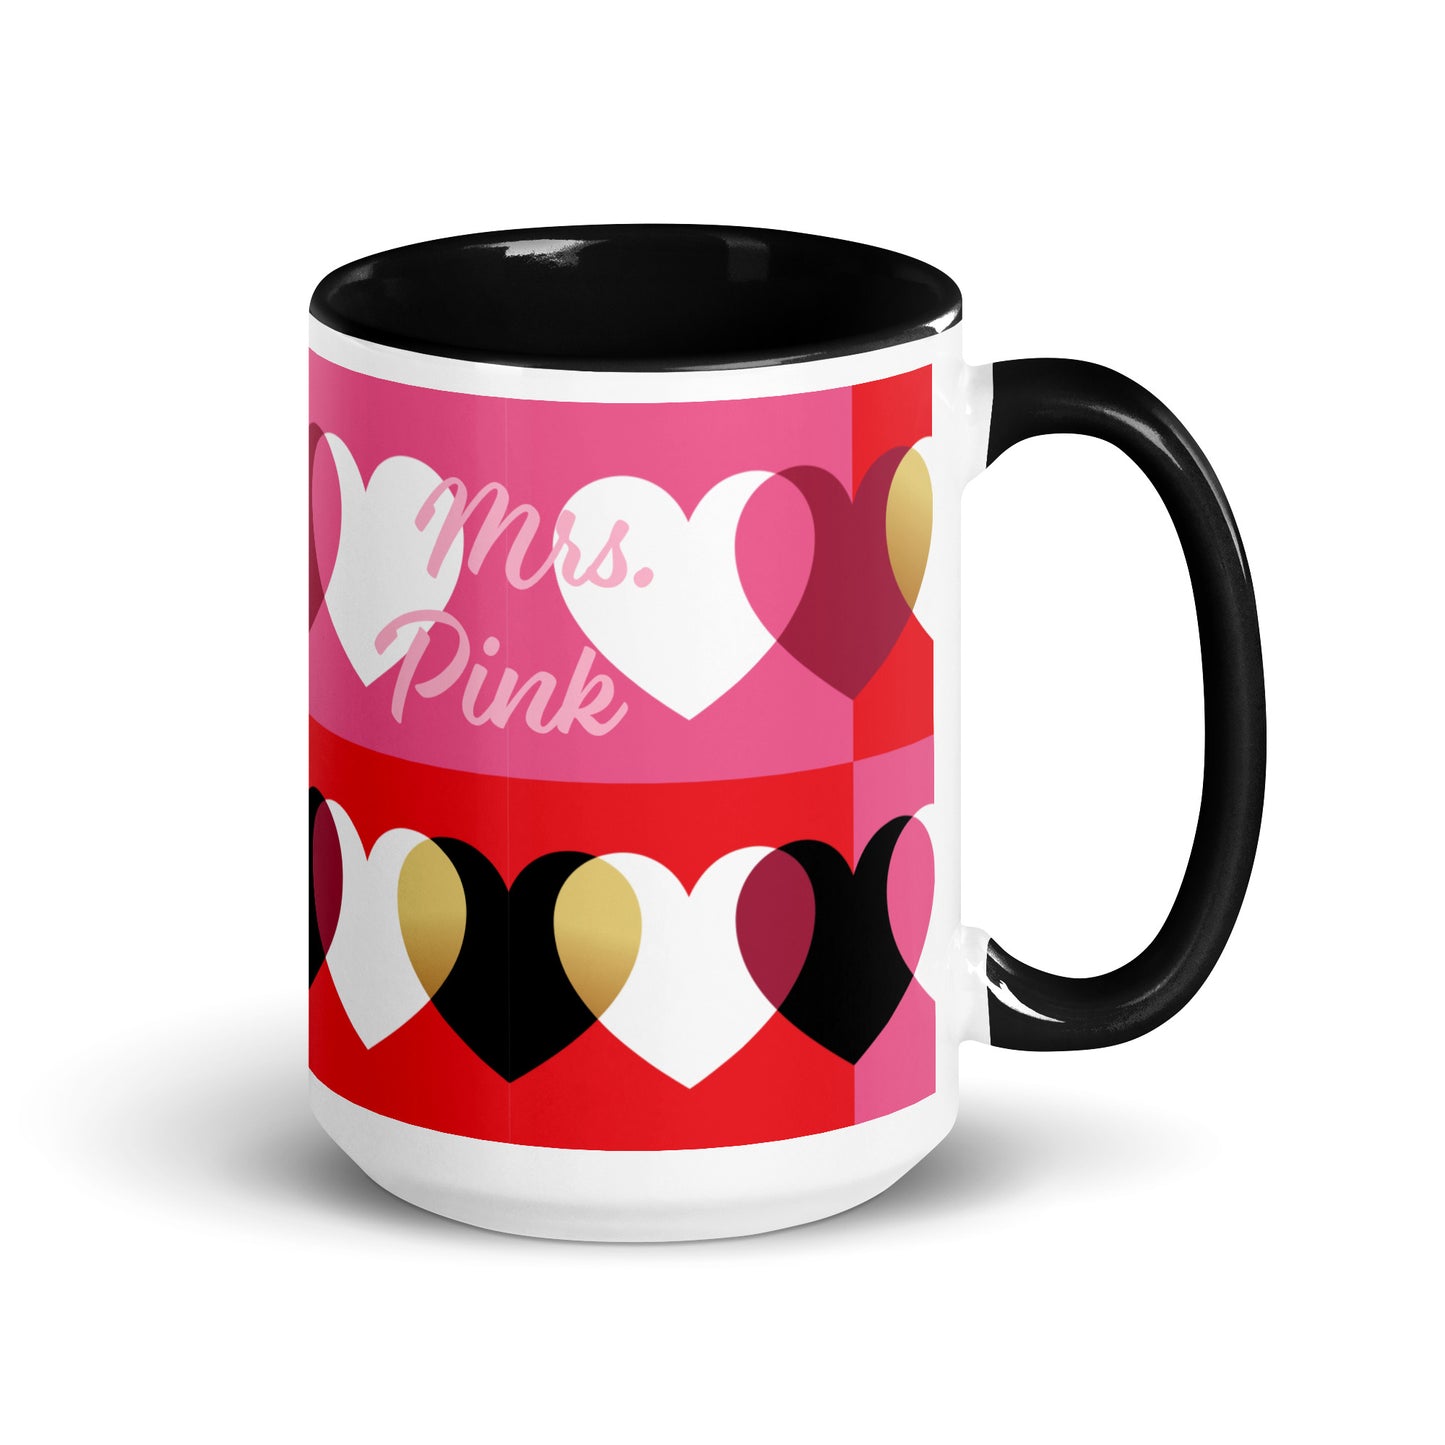 Love Mug set of 2, black and red, Mr. and Mrs, personalised